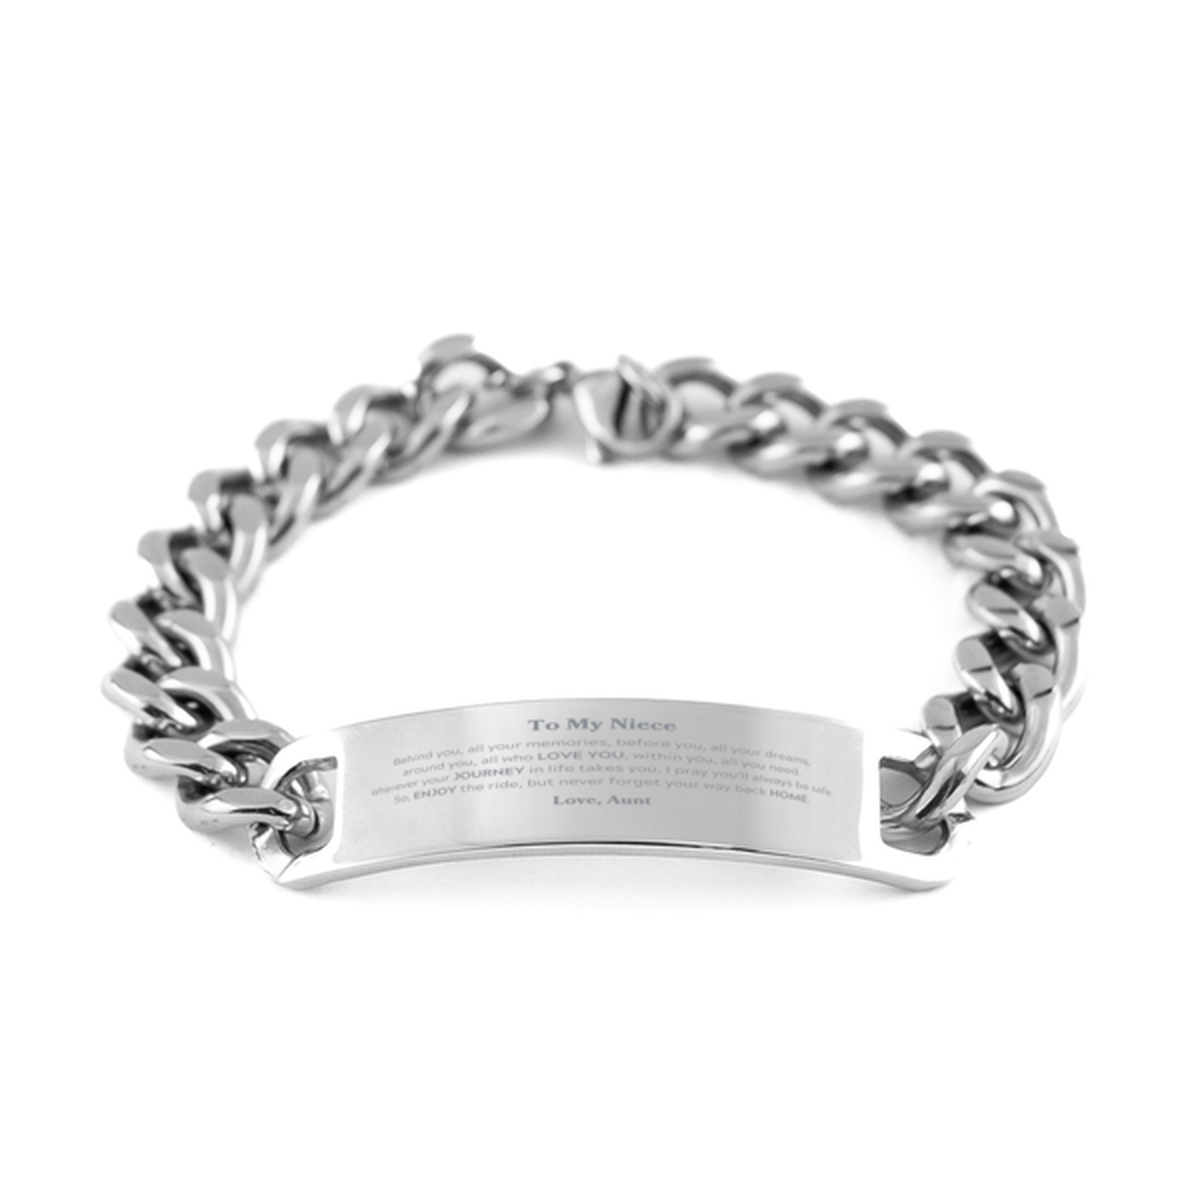 To My Niece Graduation Gifts from Aunt, Niece Cuban Chain Stainless Steel Bracelet Christmas Birthday Gifts for Niece Behind you, all your memories, before you, all your dreams. Love, Aunt